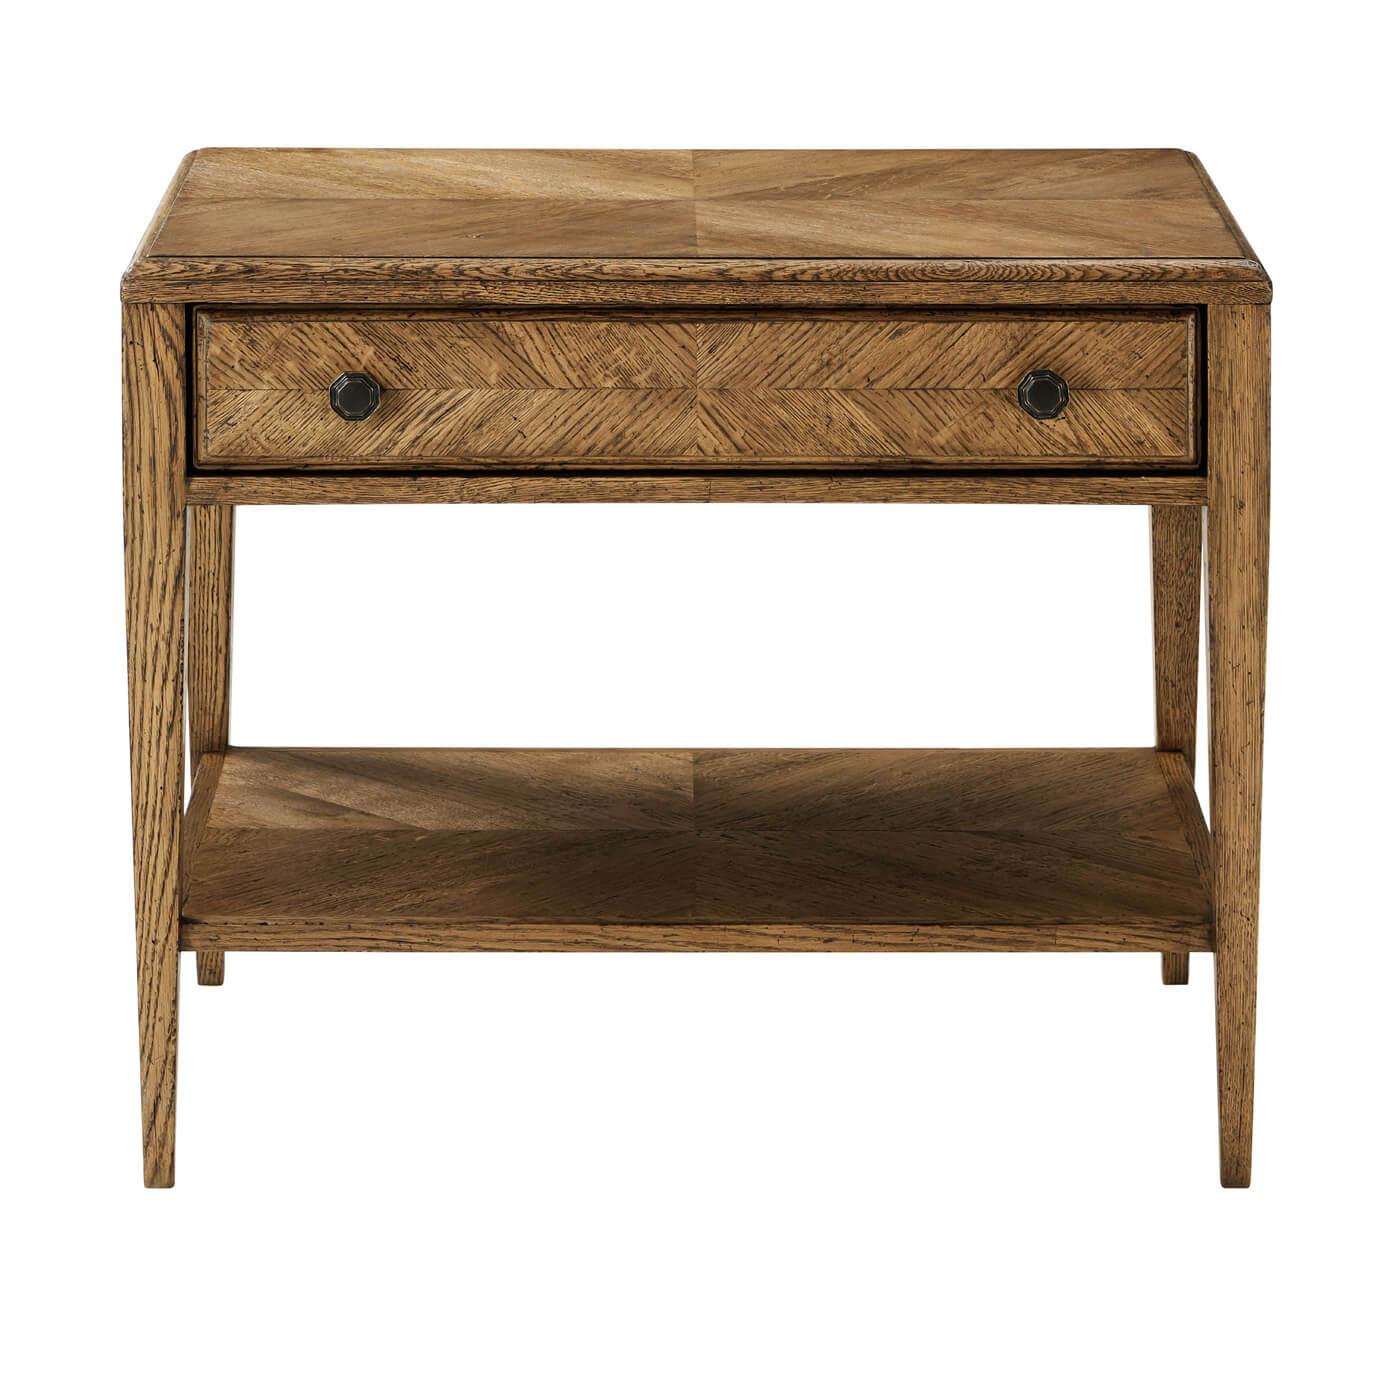 Wood Rustic Oak End Table For Sale